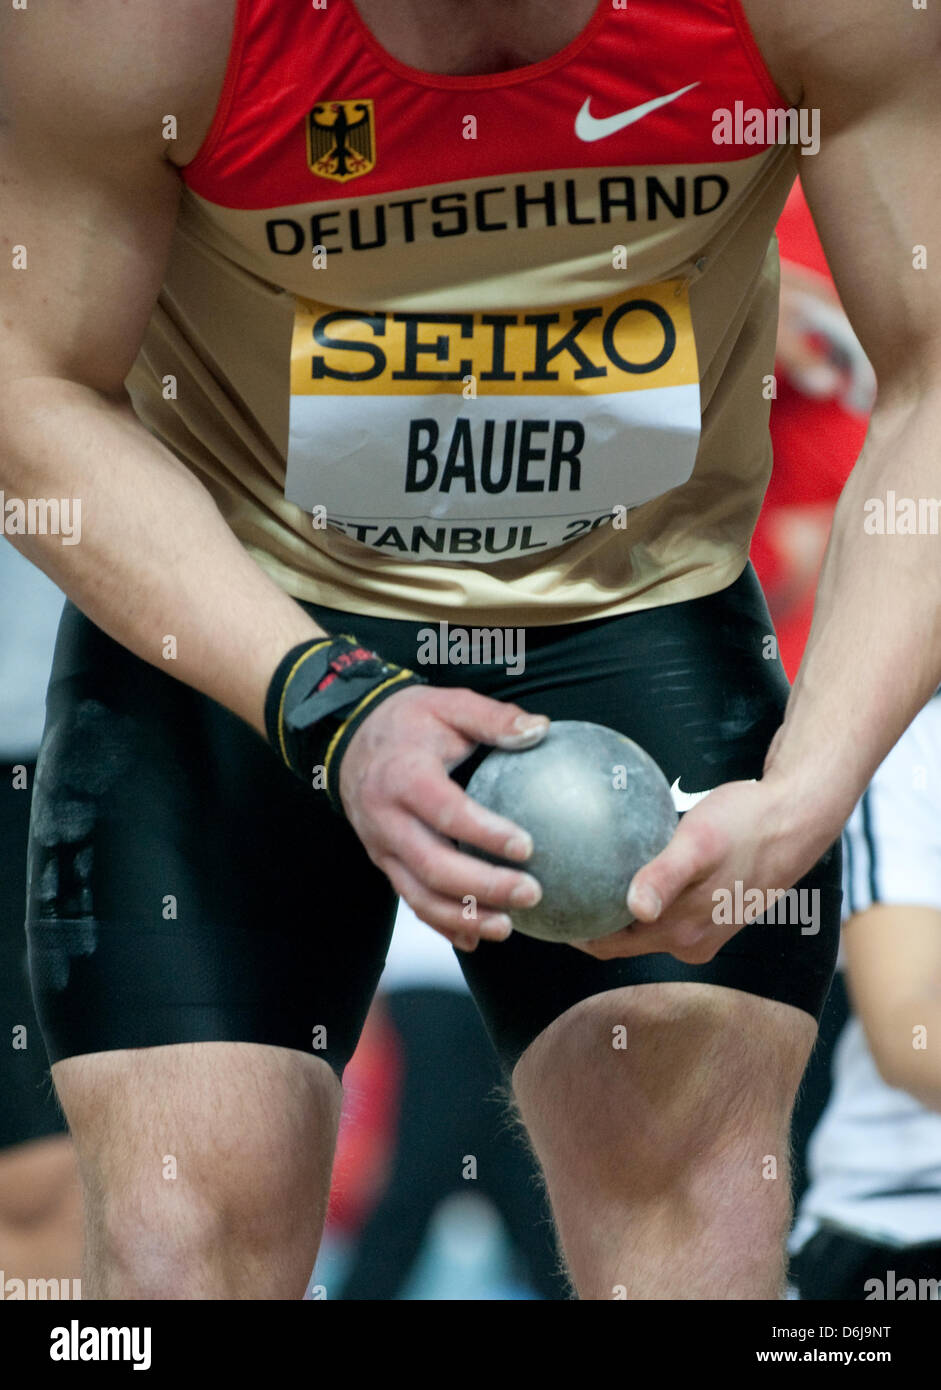 Candy Bauer of Germany prepares prior to the Men's shot put qualification at the IAAF World Athletics Indoor Championships at the Atakoy Arena in Istanbul, Turkey, 09 March 2012. Photo: Bernd Thissen dpa Stock Photo